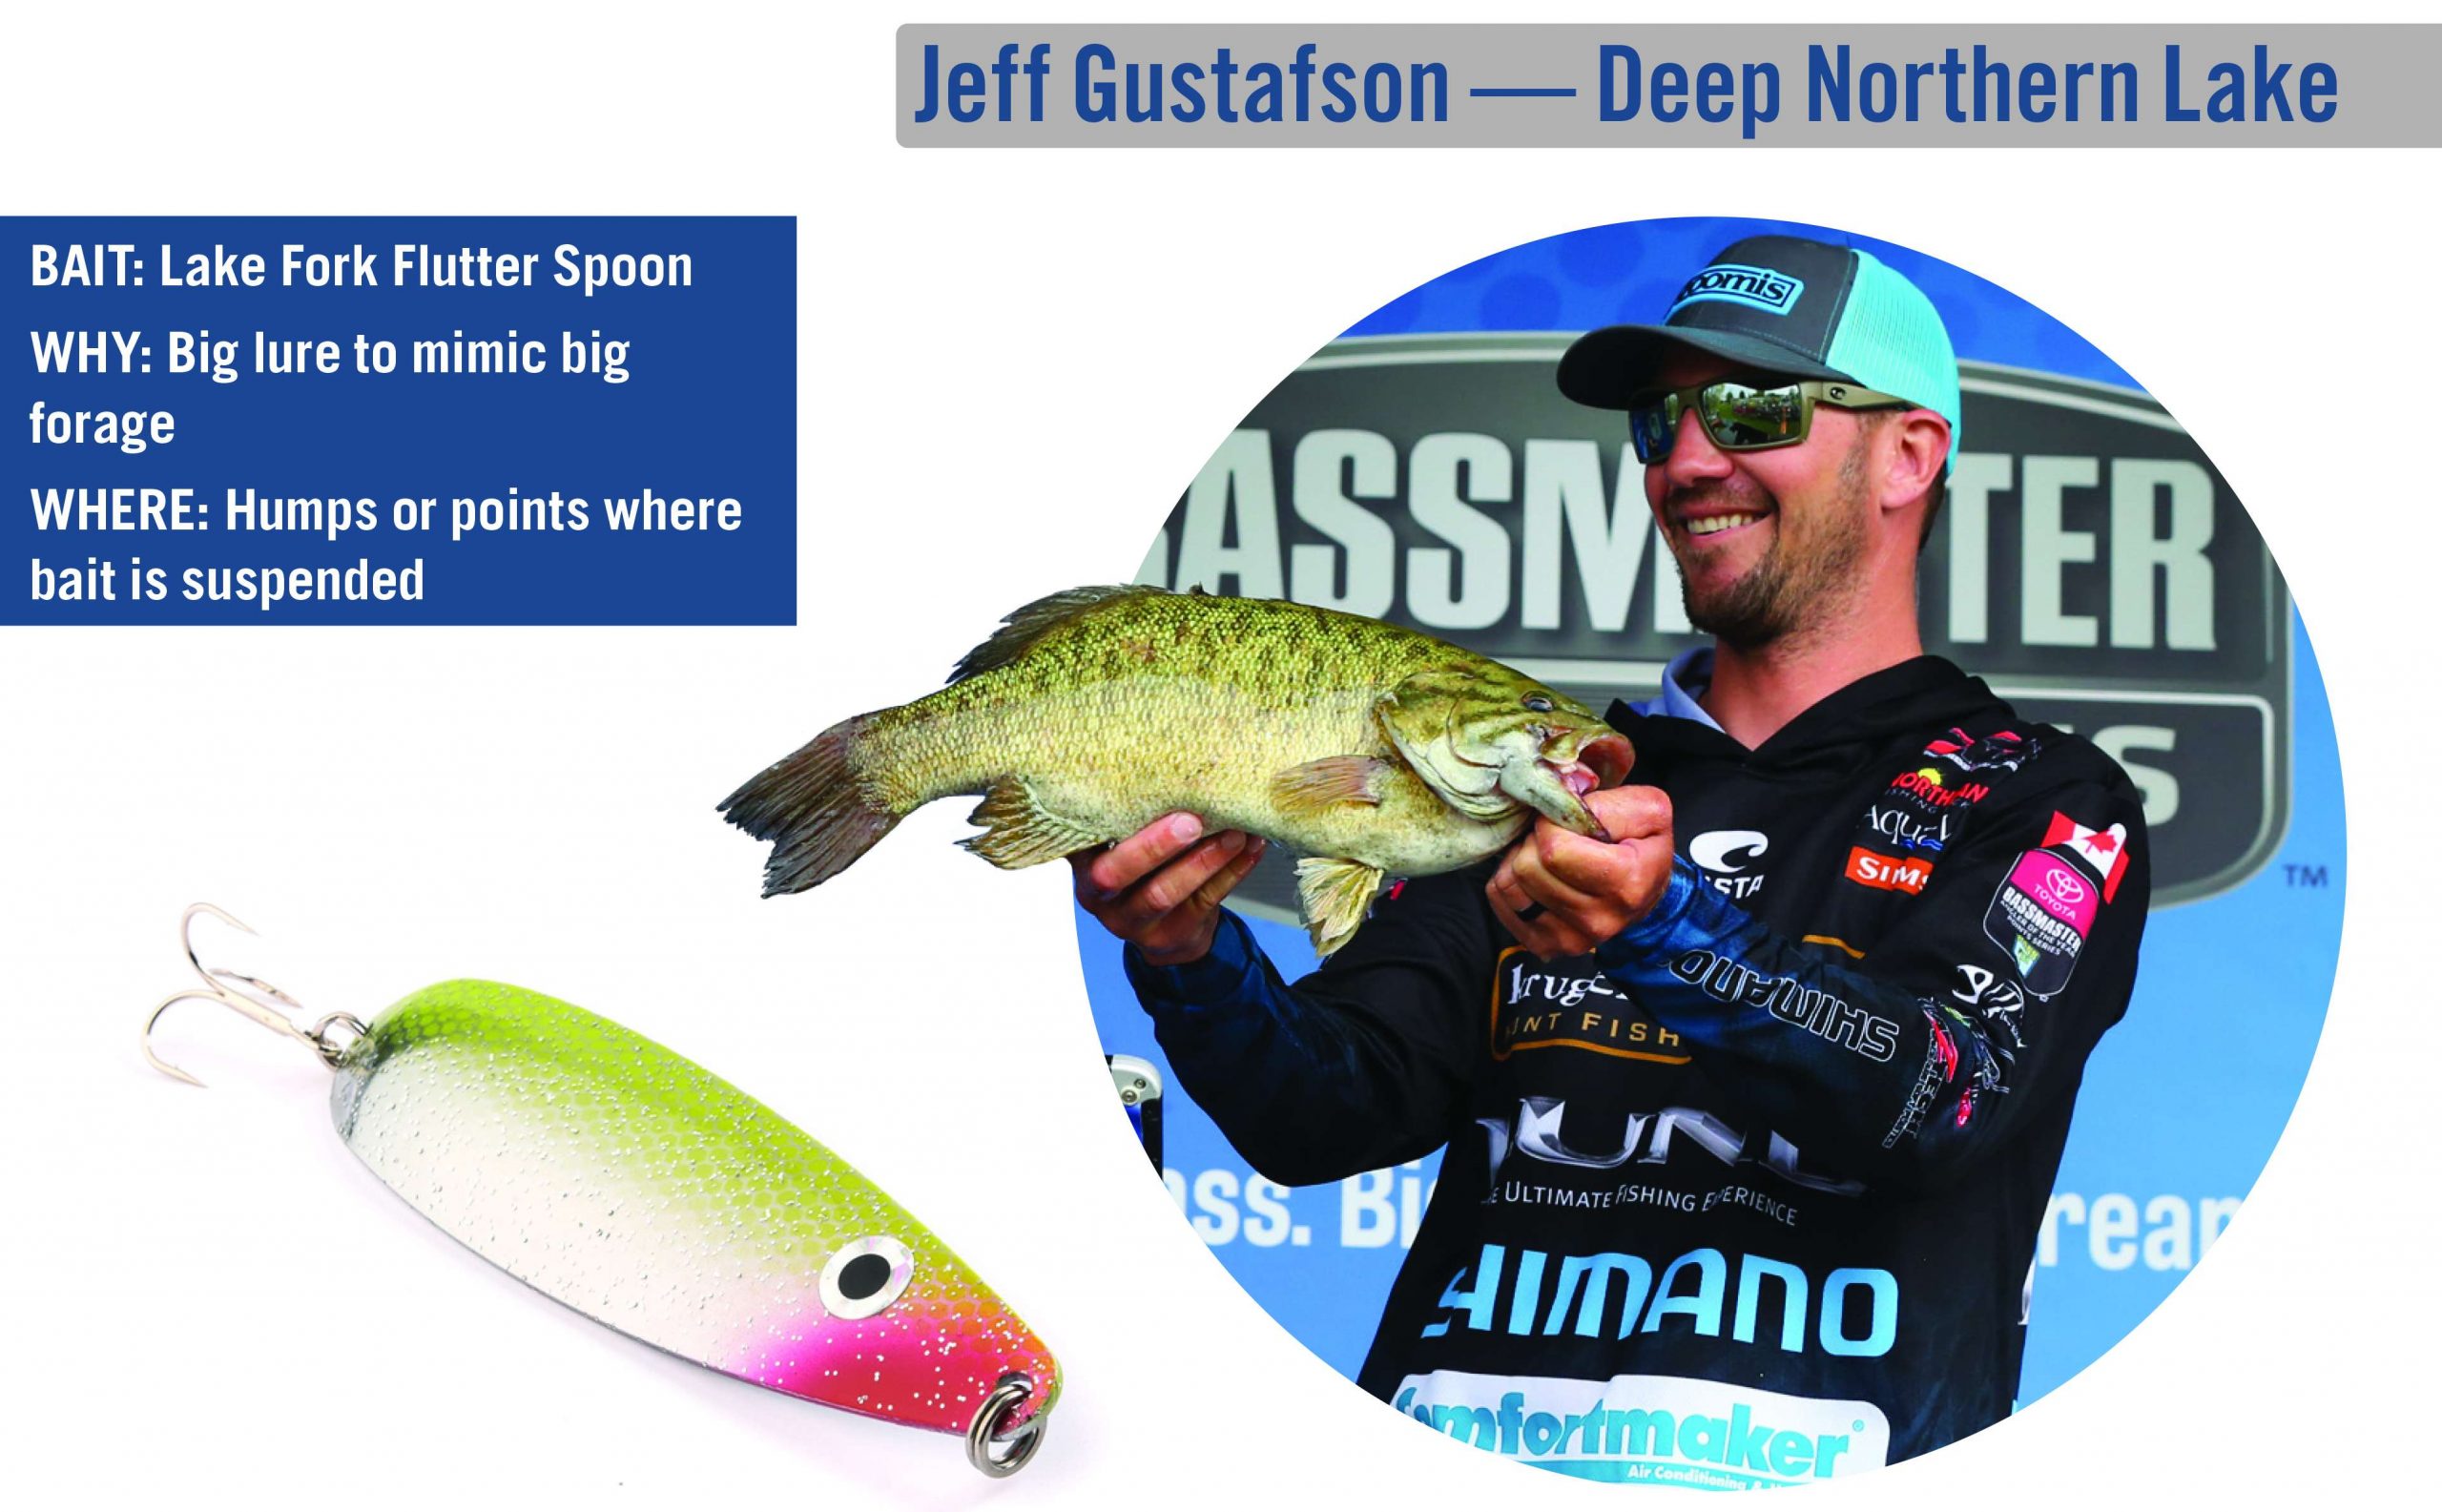 Land of giants: The hunt for fall studs - Bassmaster